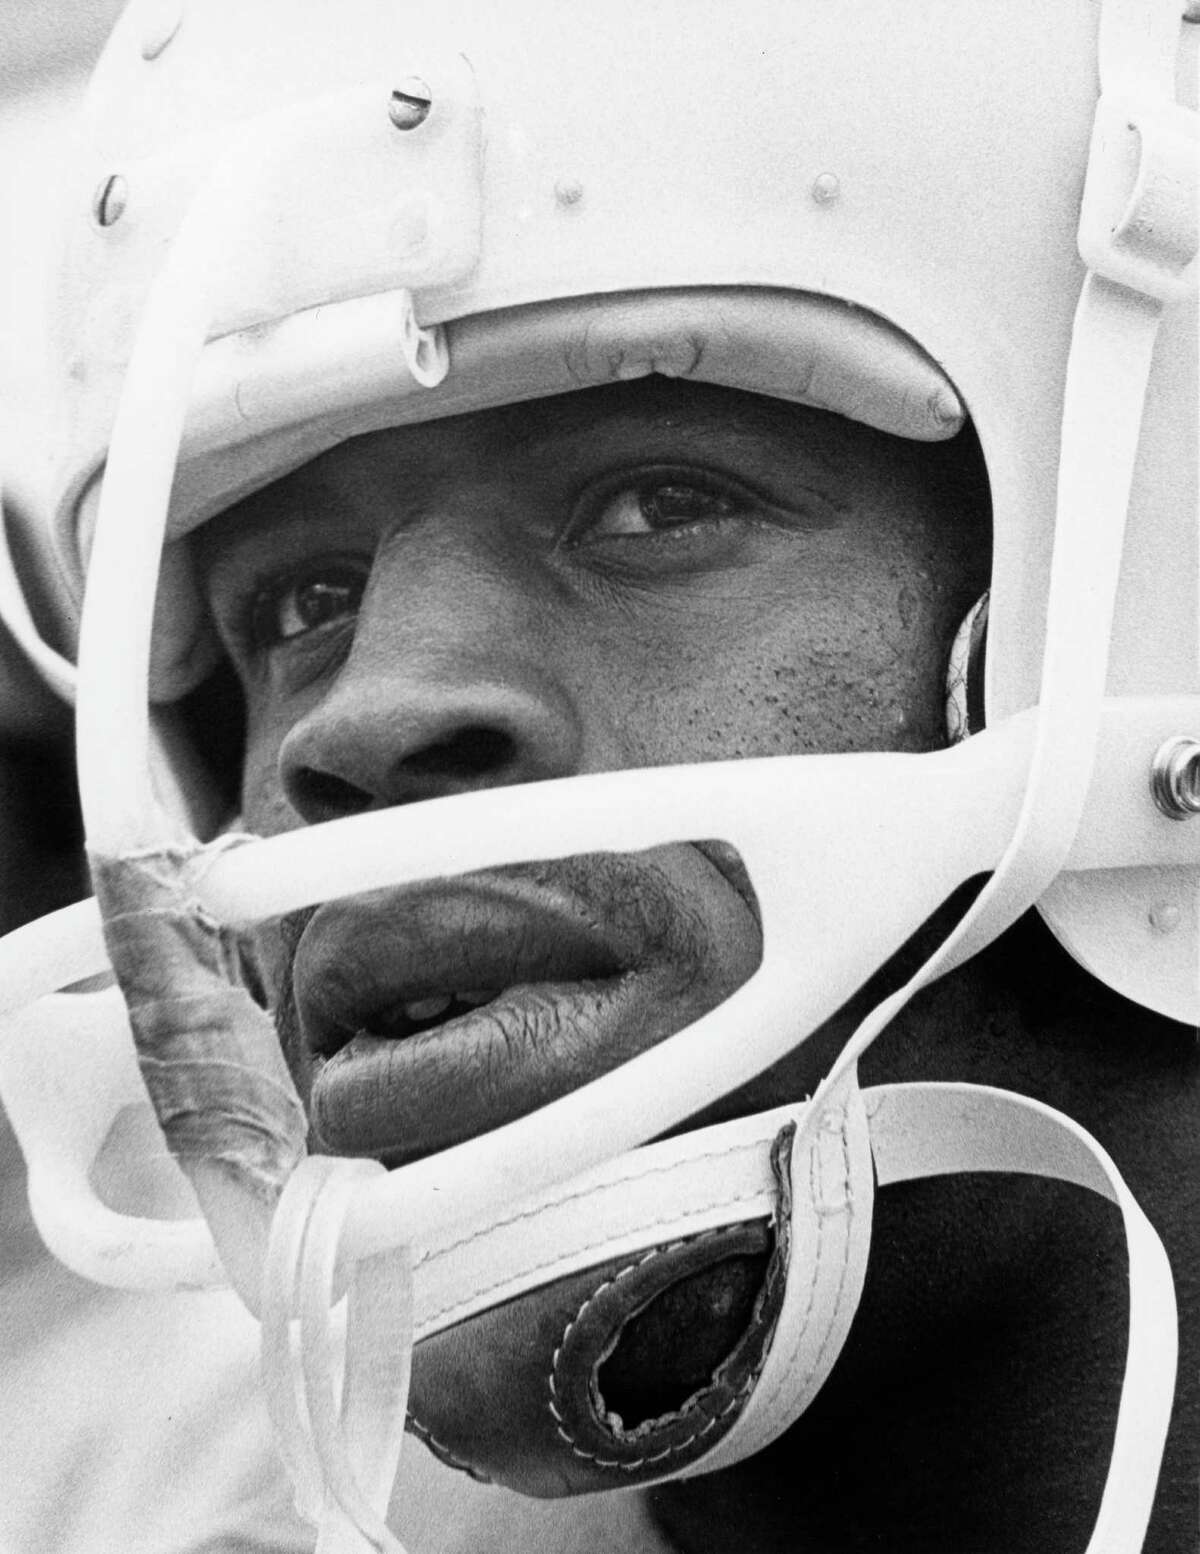 Texas Longhorns running back Earl Campbell shown in 1975.